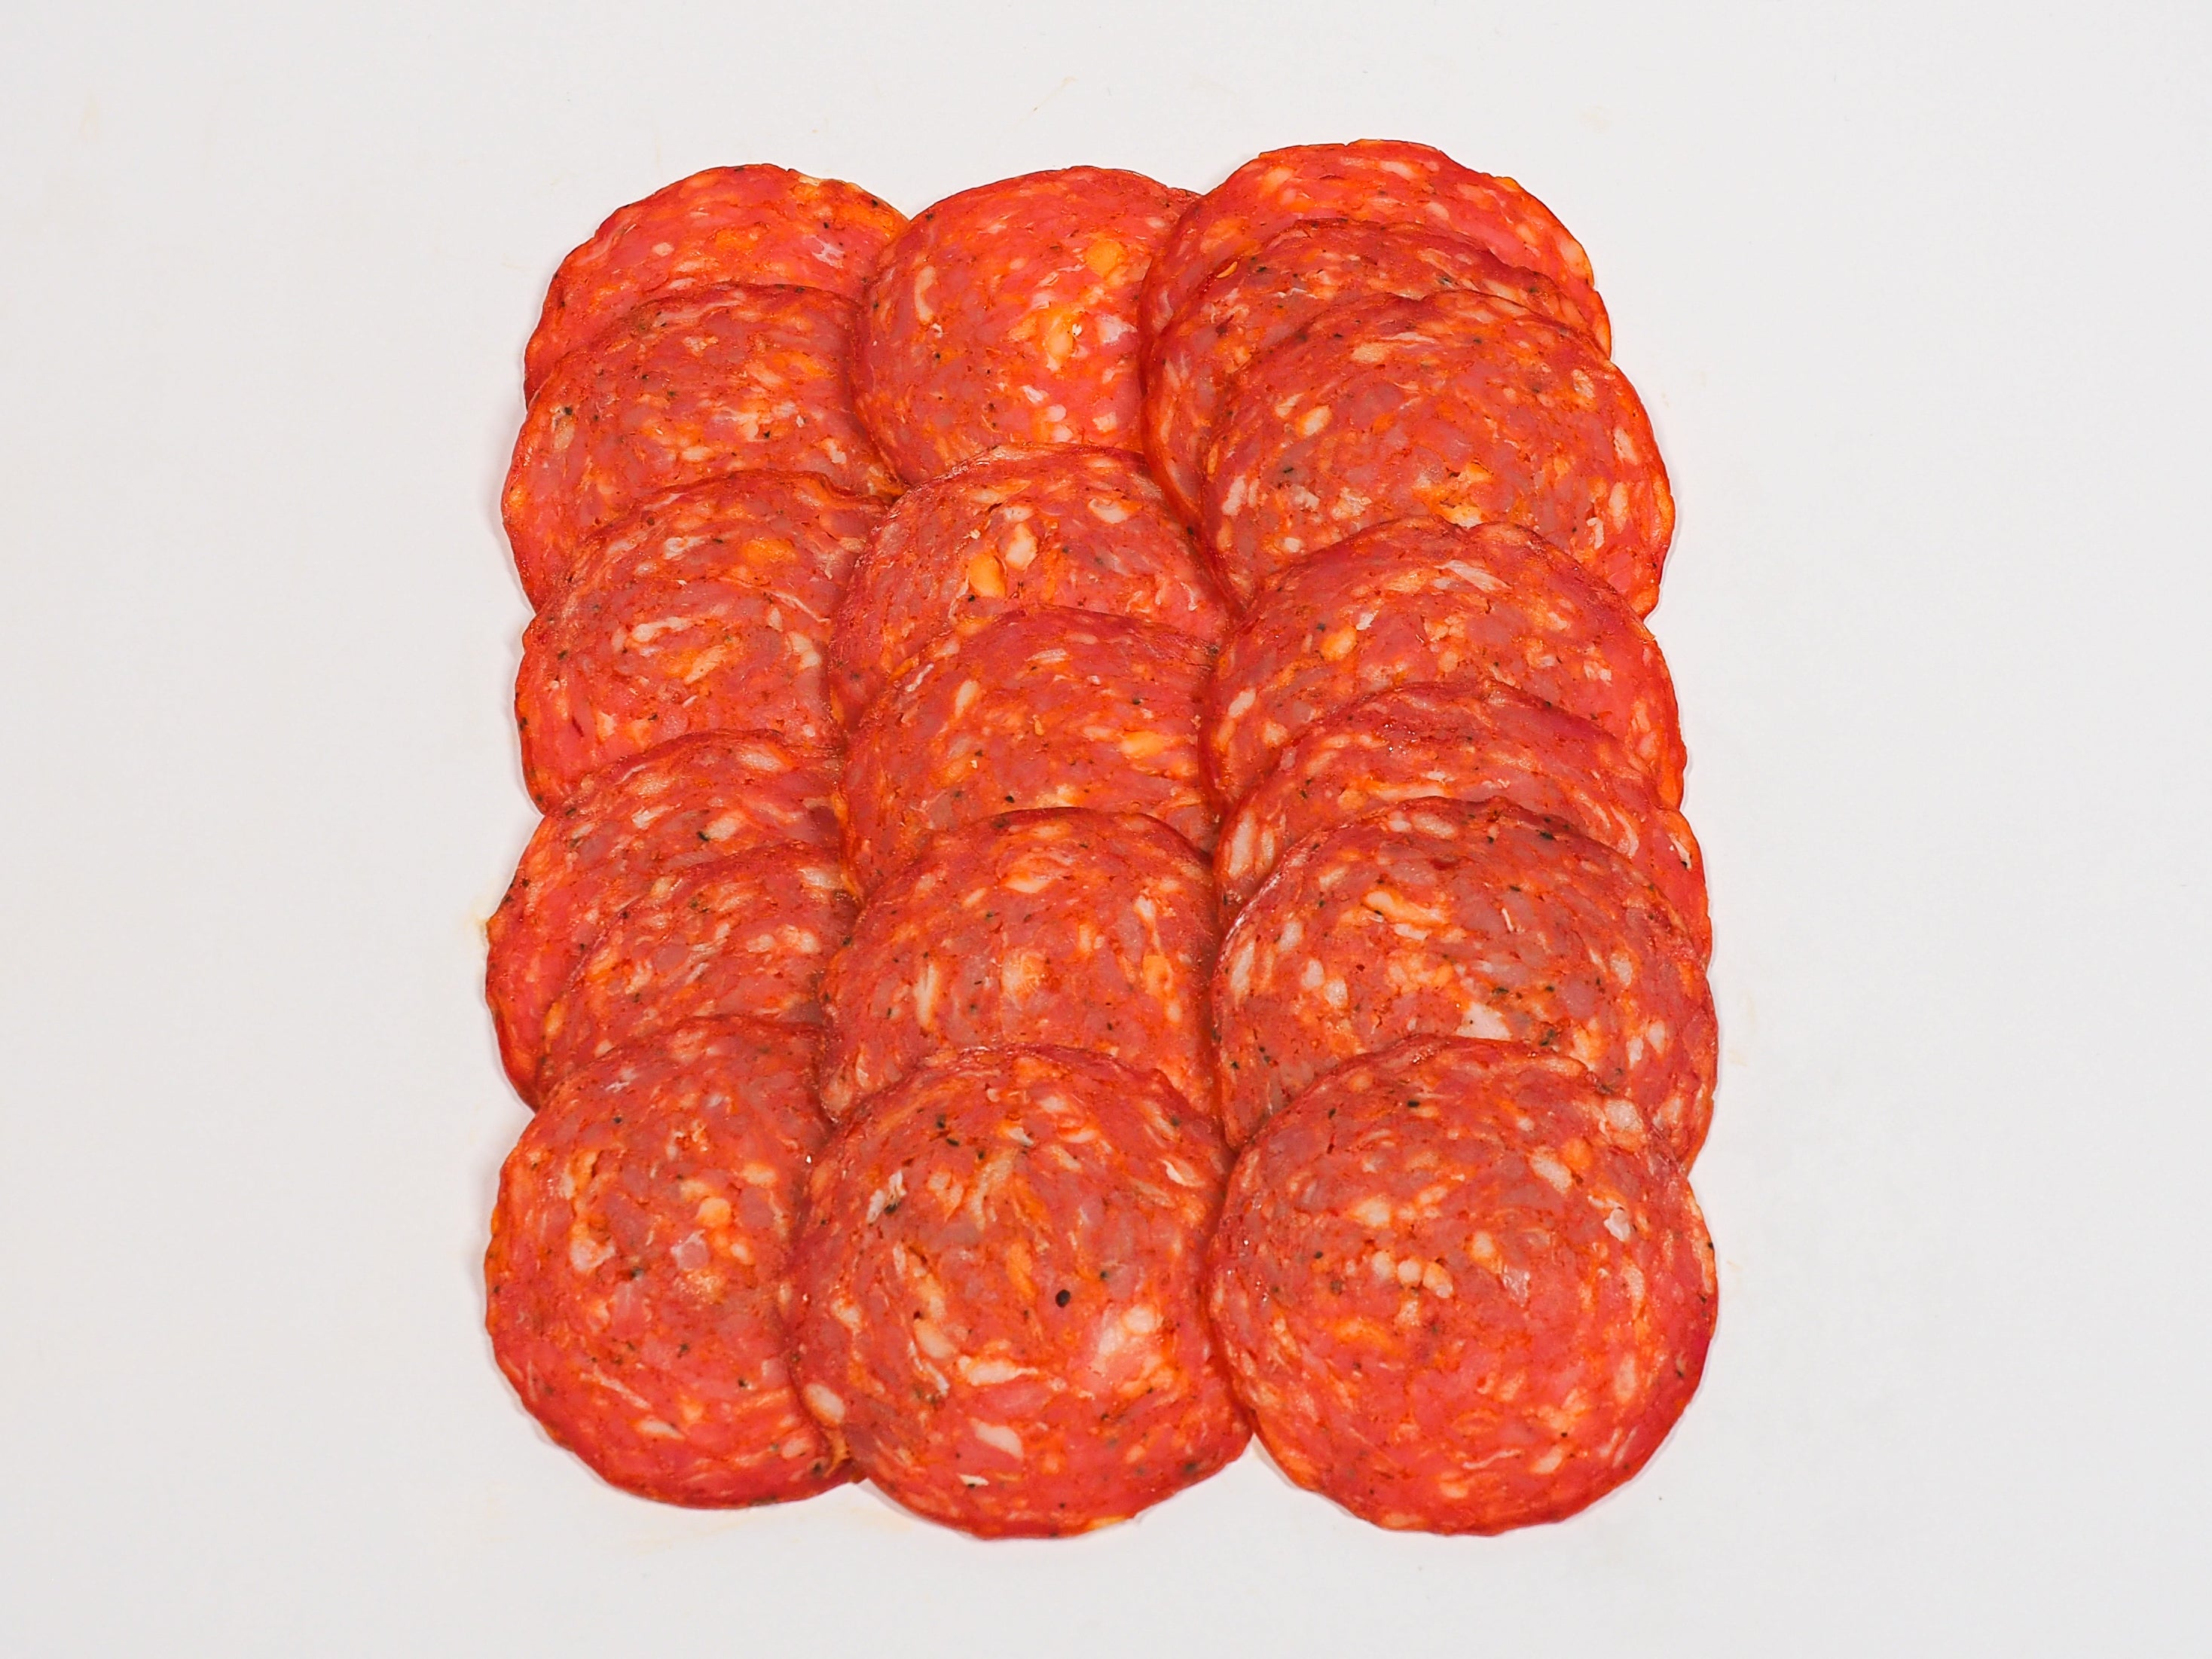 Pepperoni Slices, Beef